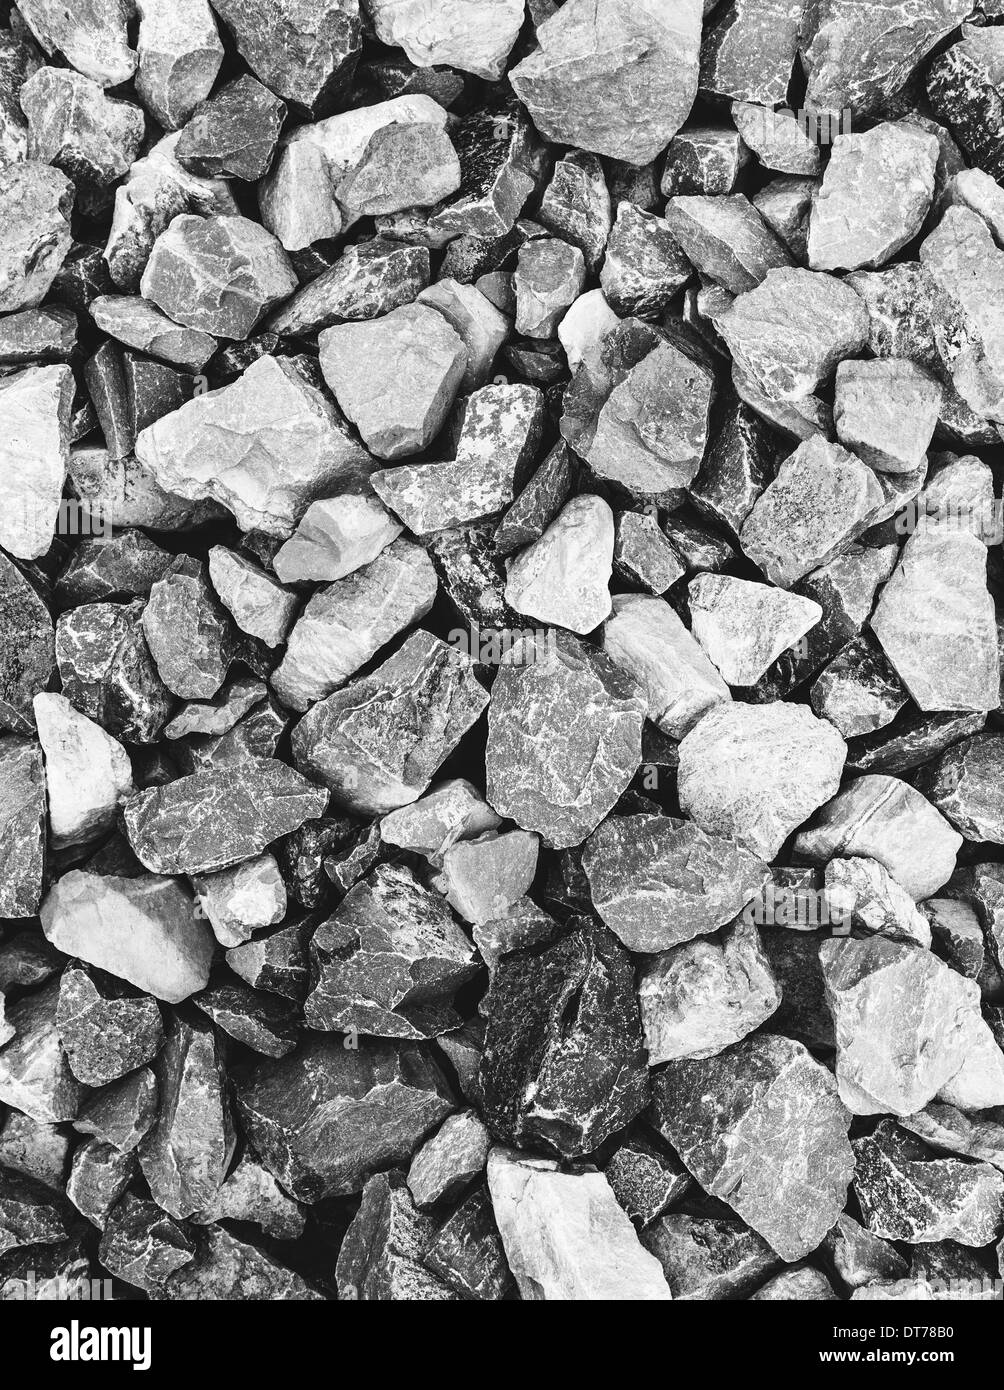 Rock pile used for construction, in King county, Washington, in the USA. Stones and rubble. Stock Photo